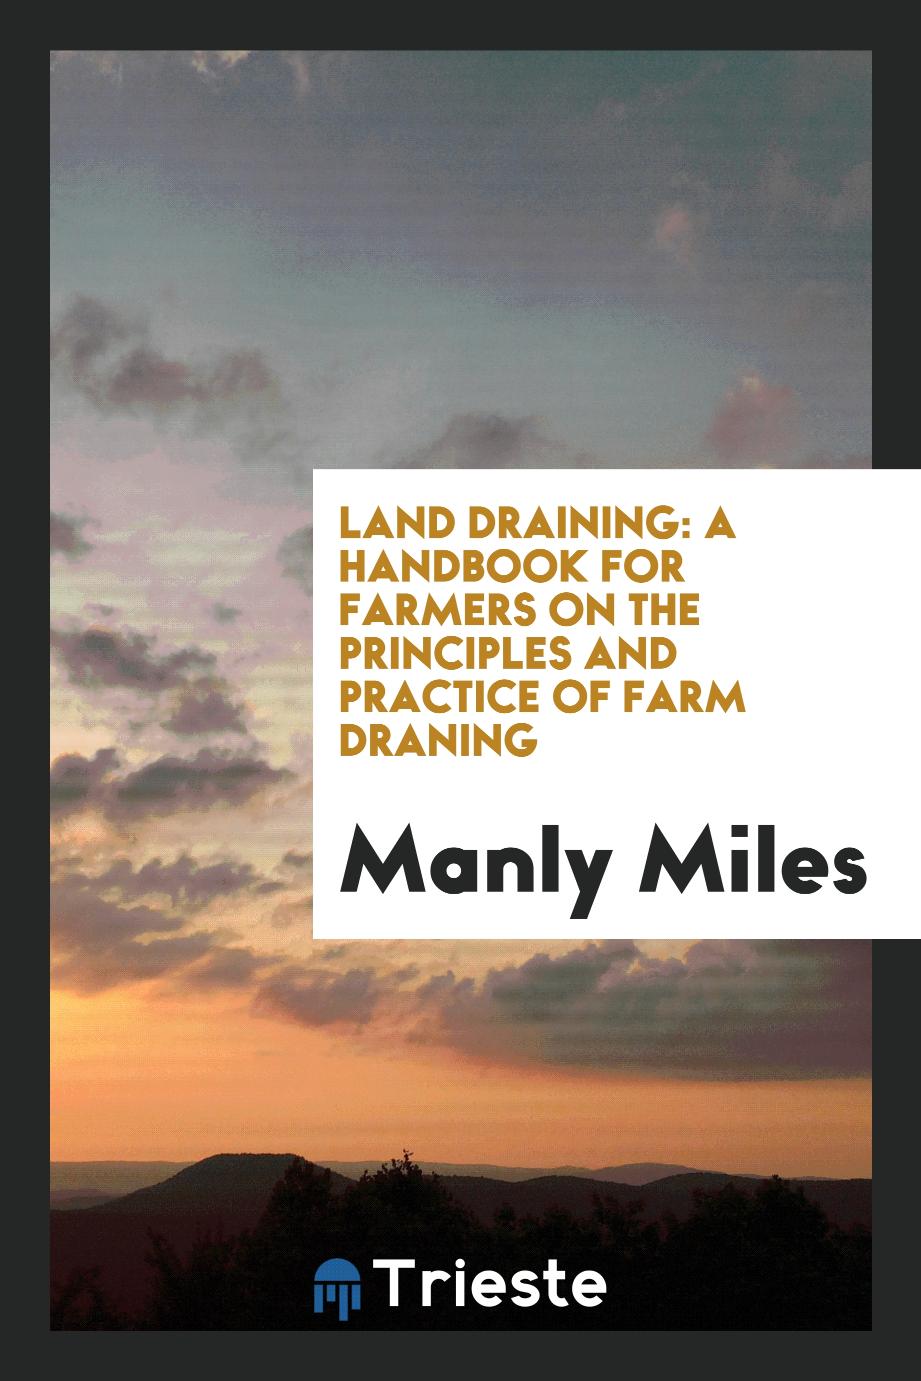 Land Draining: A Handbook for Farmers on the Principles and Practice of Farm Draning